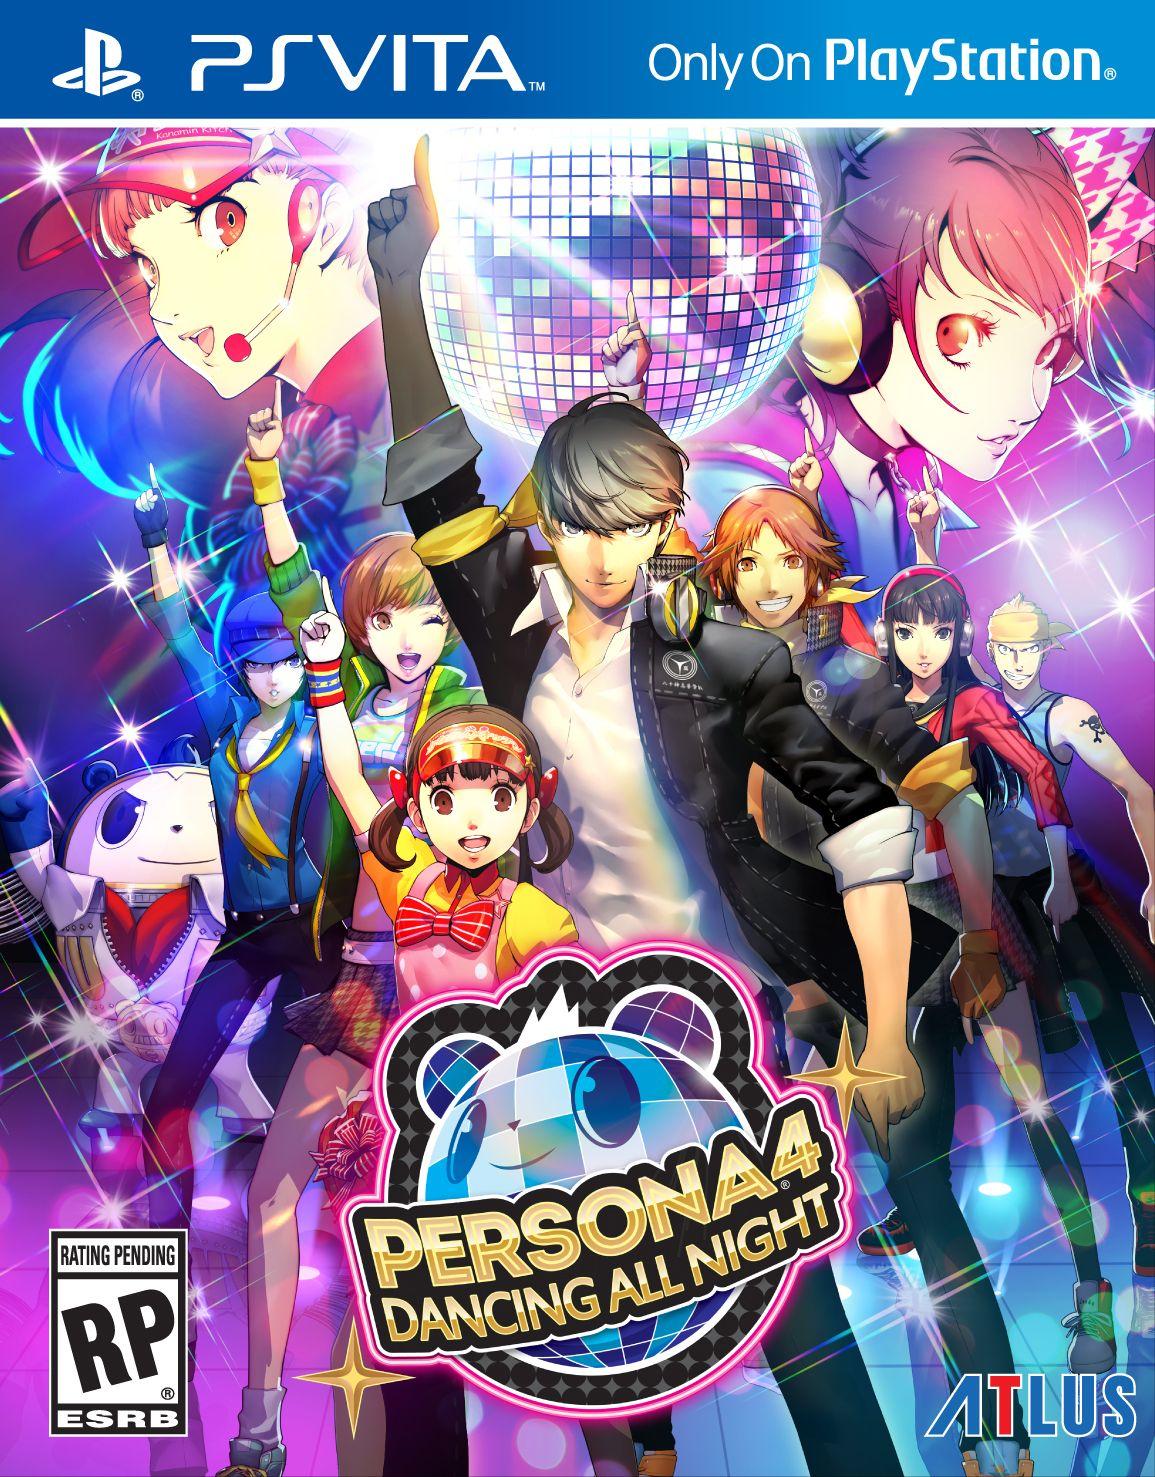 Persona 4: Dancing All Night English Release Information Revealed